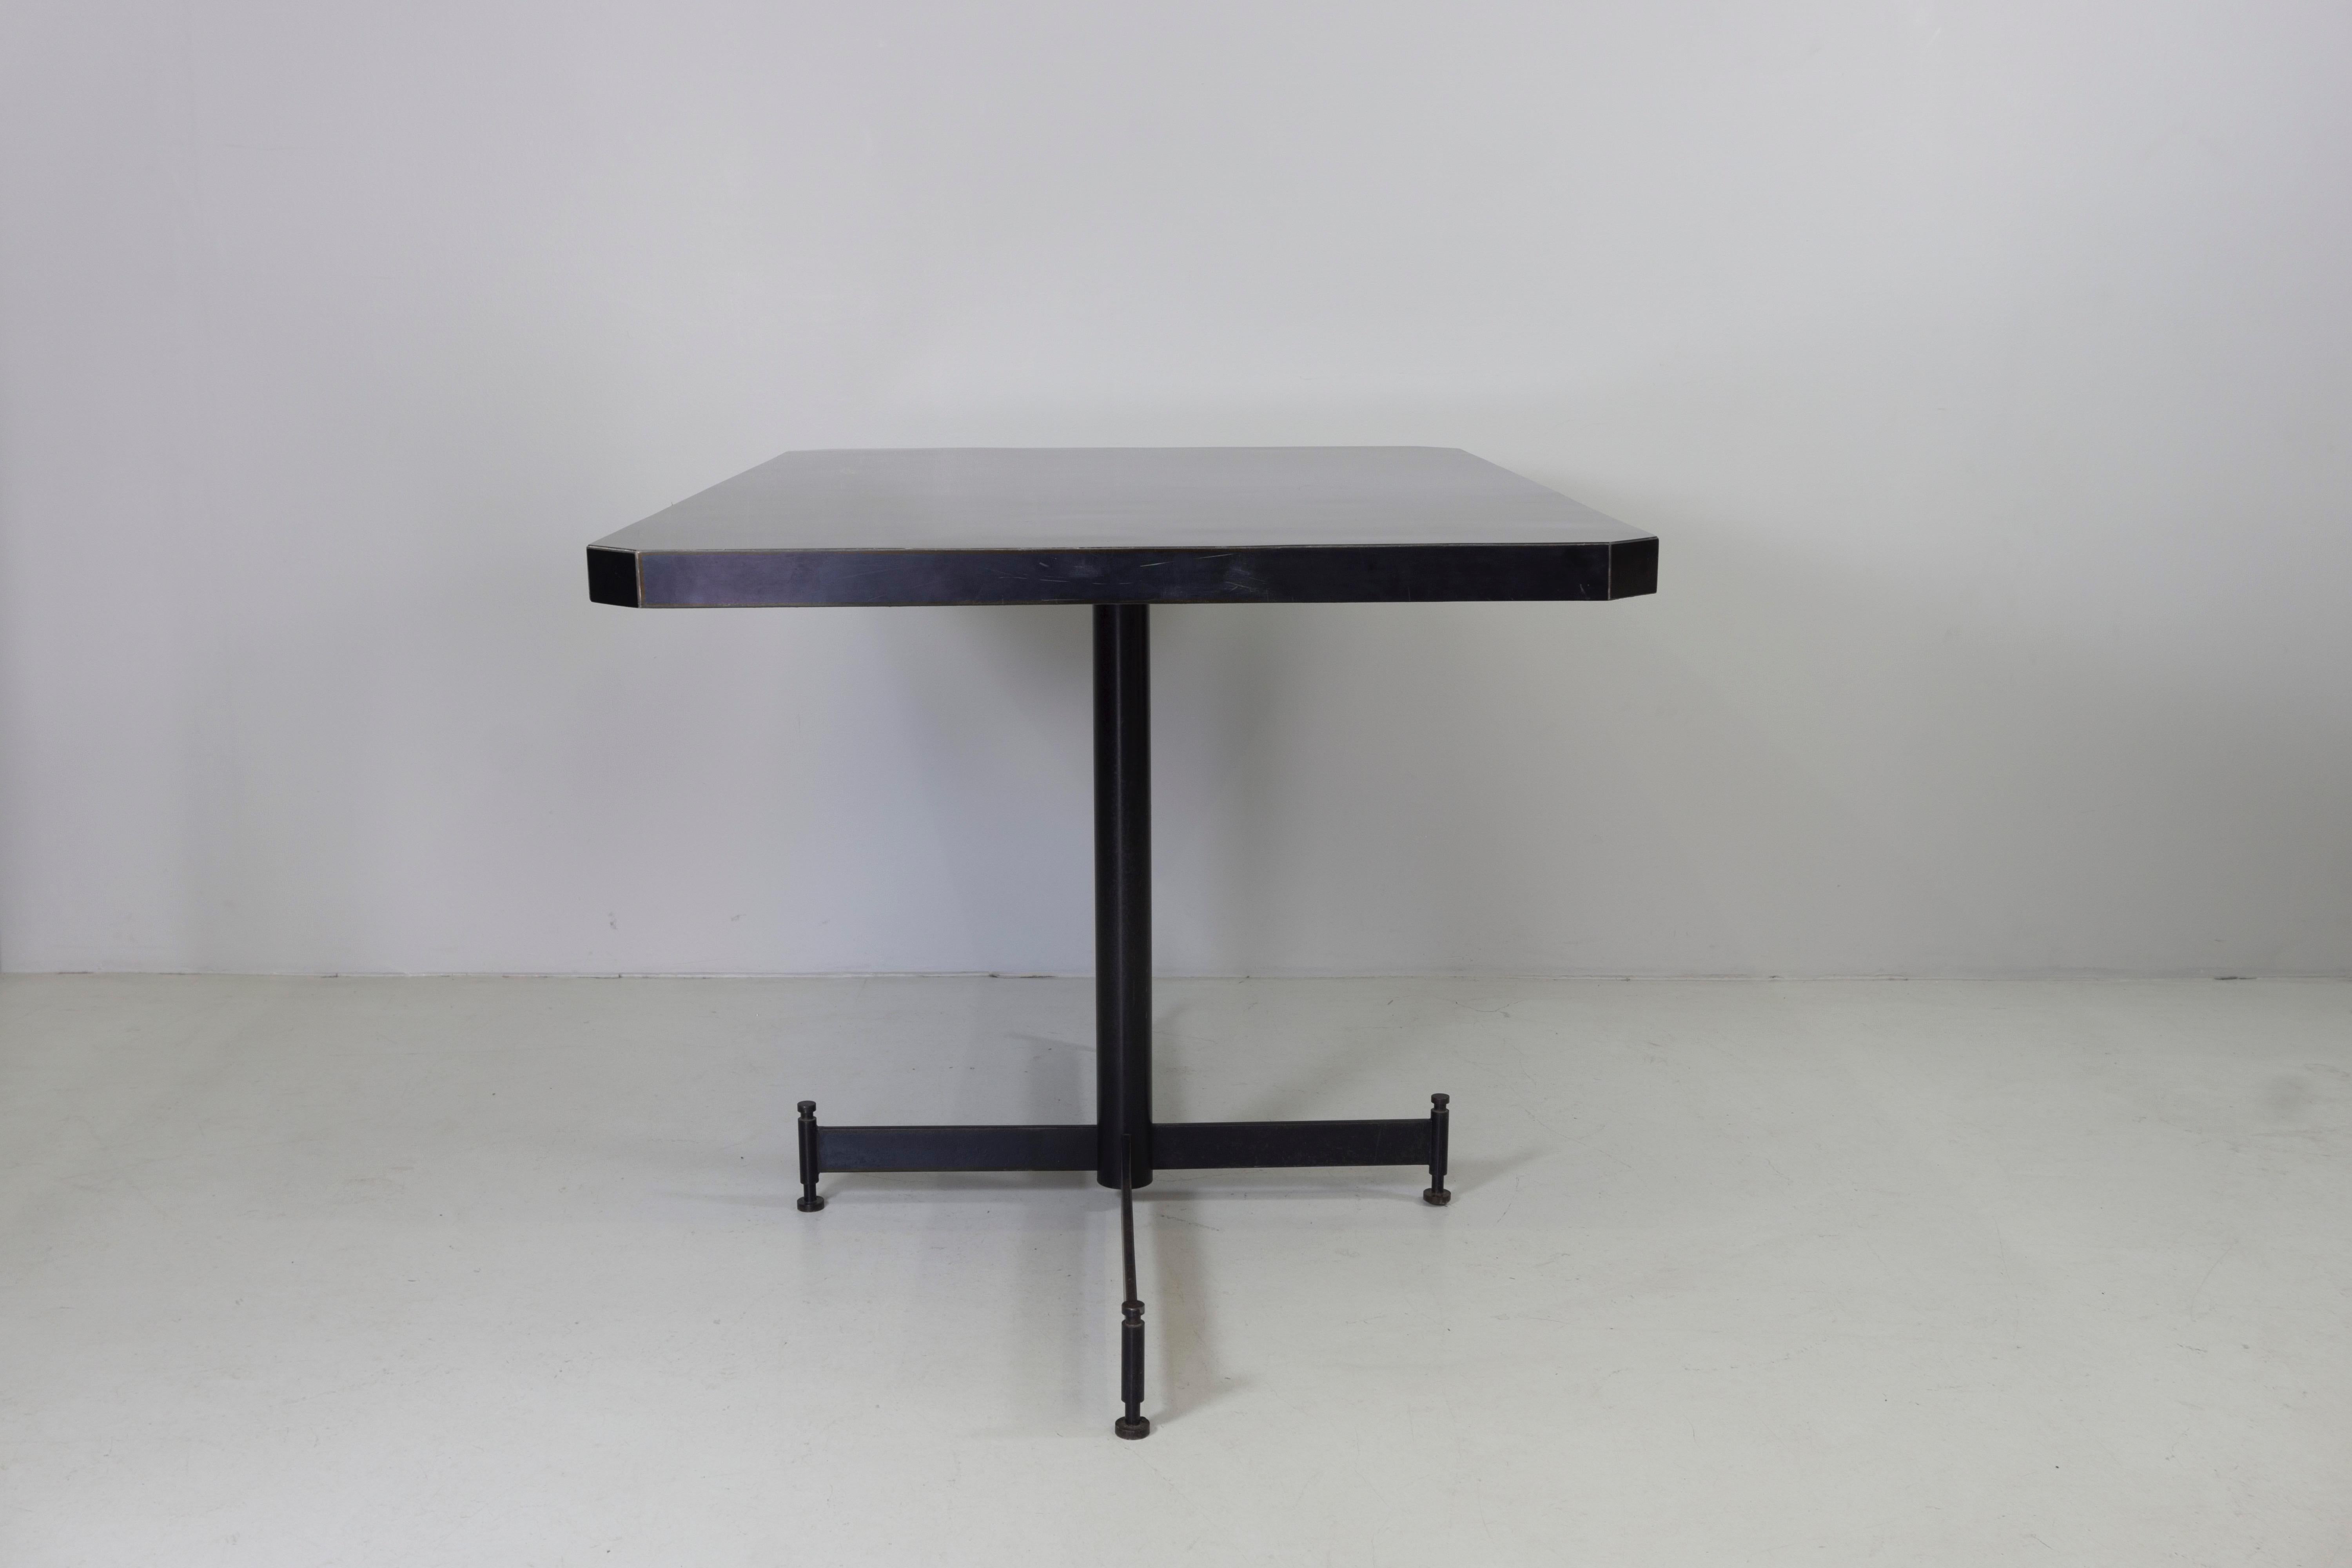 Dining table from the Olivetti Mensa in Ivrea. Plate made of wood, black Formica cover. Black lacquered metal construction, feet adjustable in height.
Design: Ignazio Gardella
Dimensions: W. 125cm, D.85cm, H.78cm
Provenience: Mensa Olivetti ICO